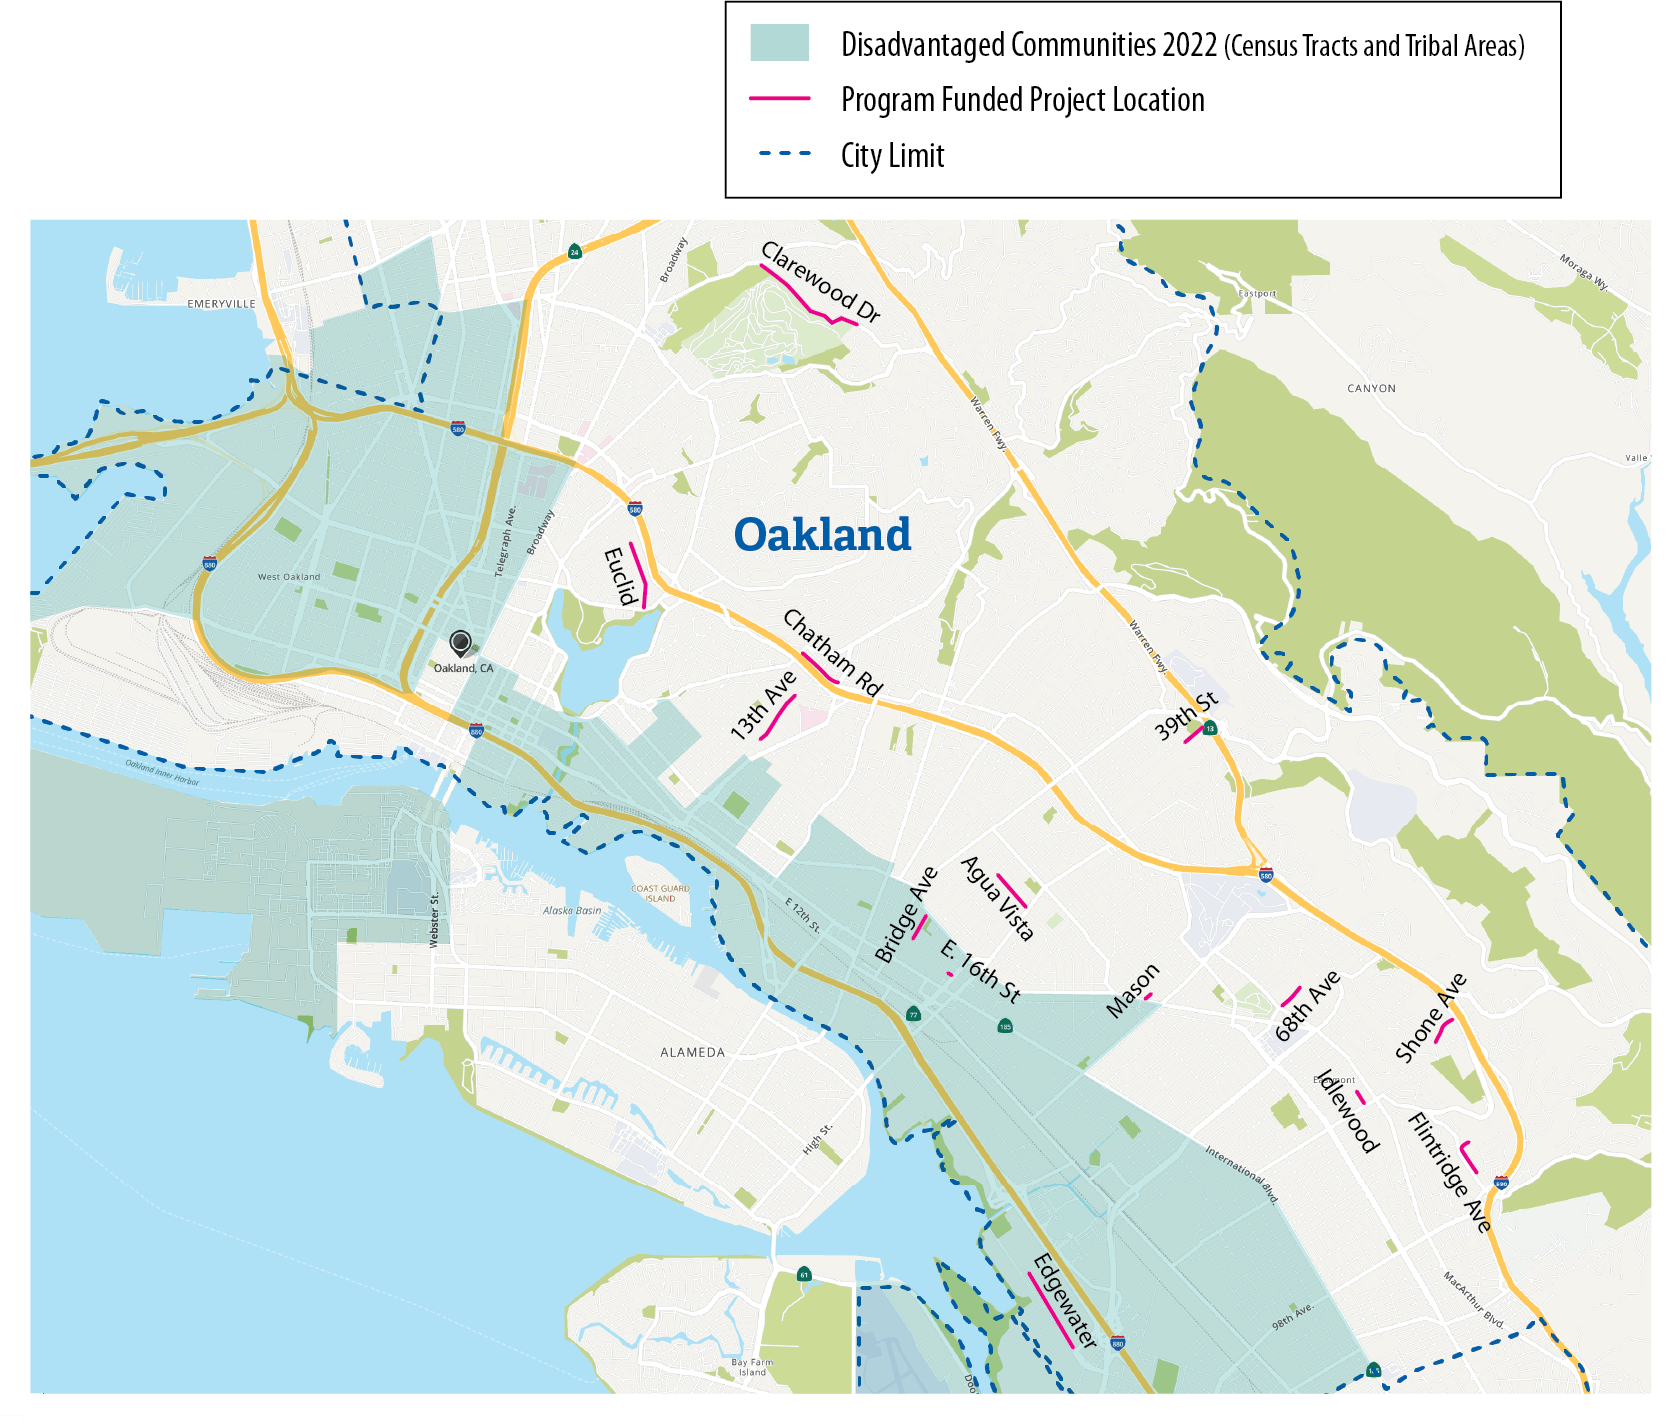 Figure A.4 is a map of Oakland showing the location of Local Streets and Roads Program funded projects in relation to Oakland’s disadvantaged communities for fiscal years 2017-18 through 2018-19.